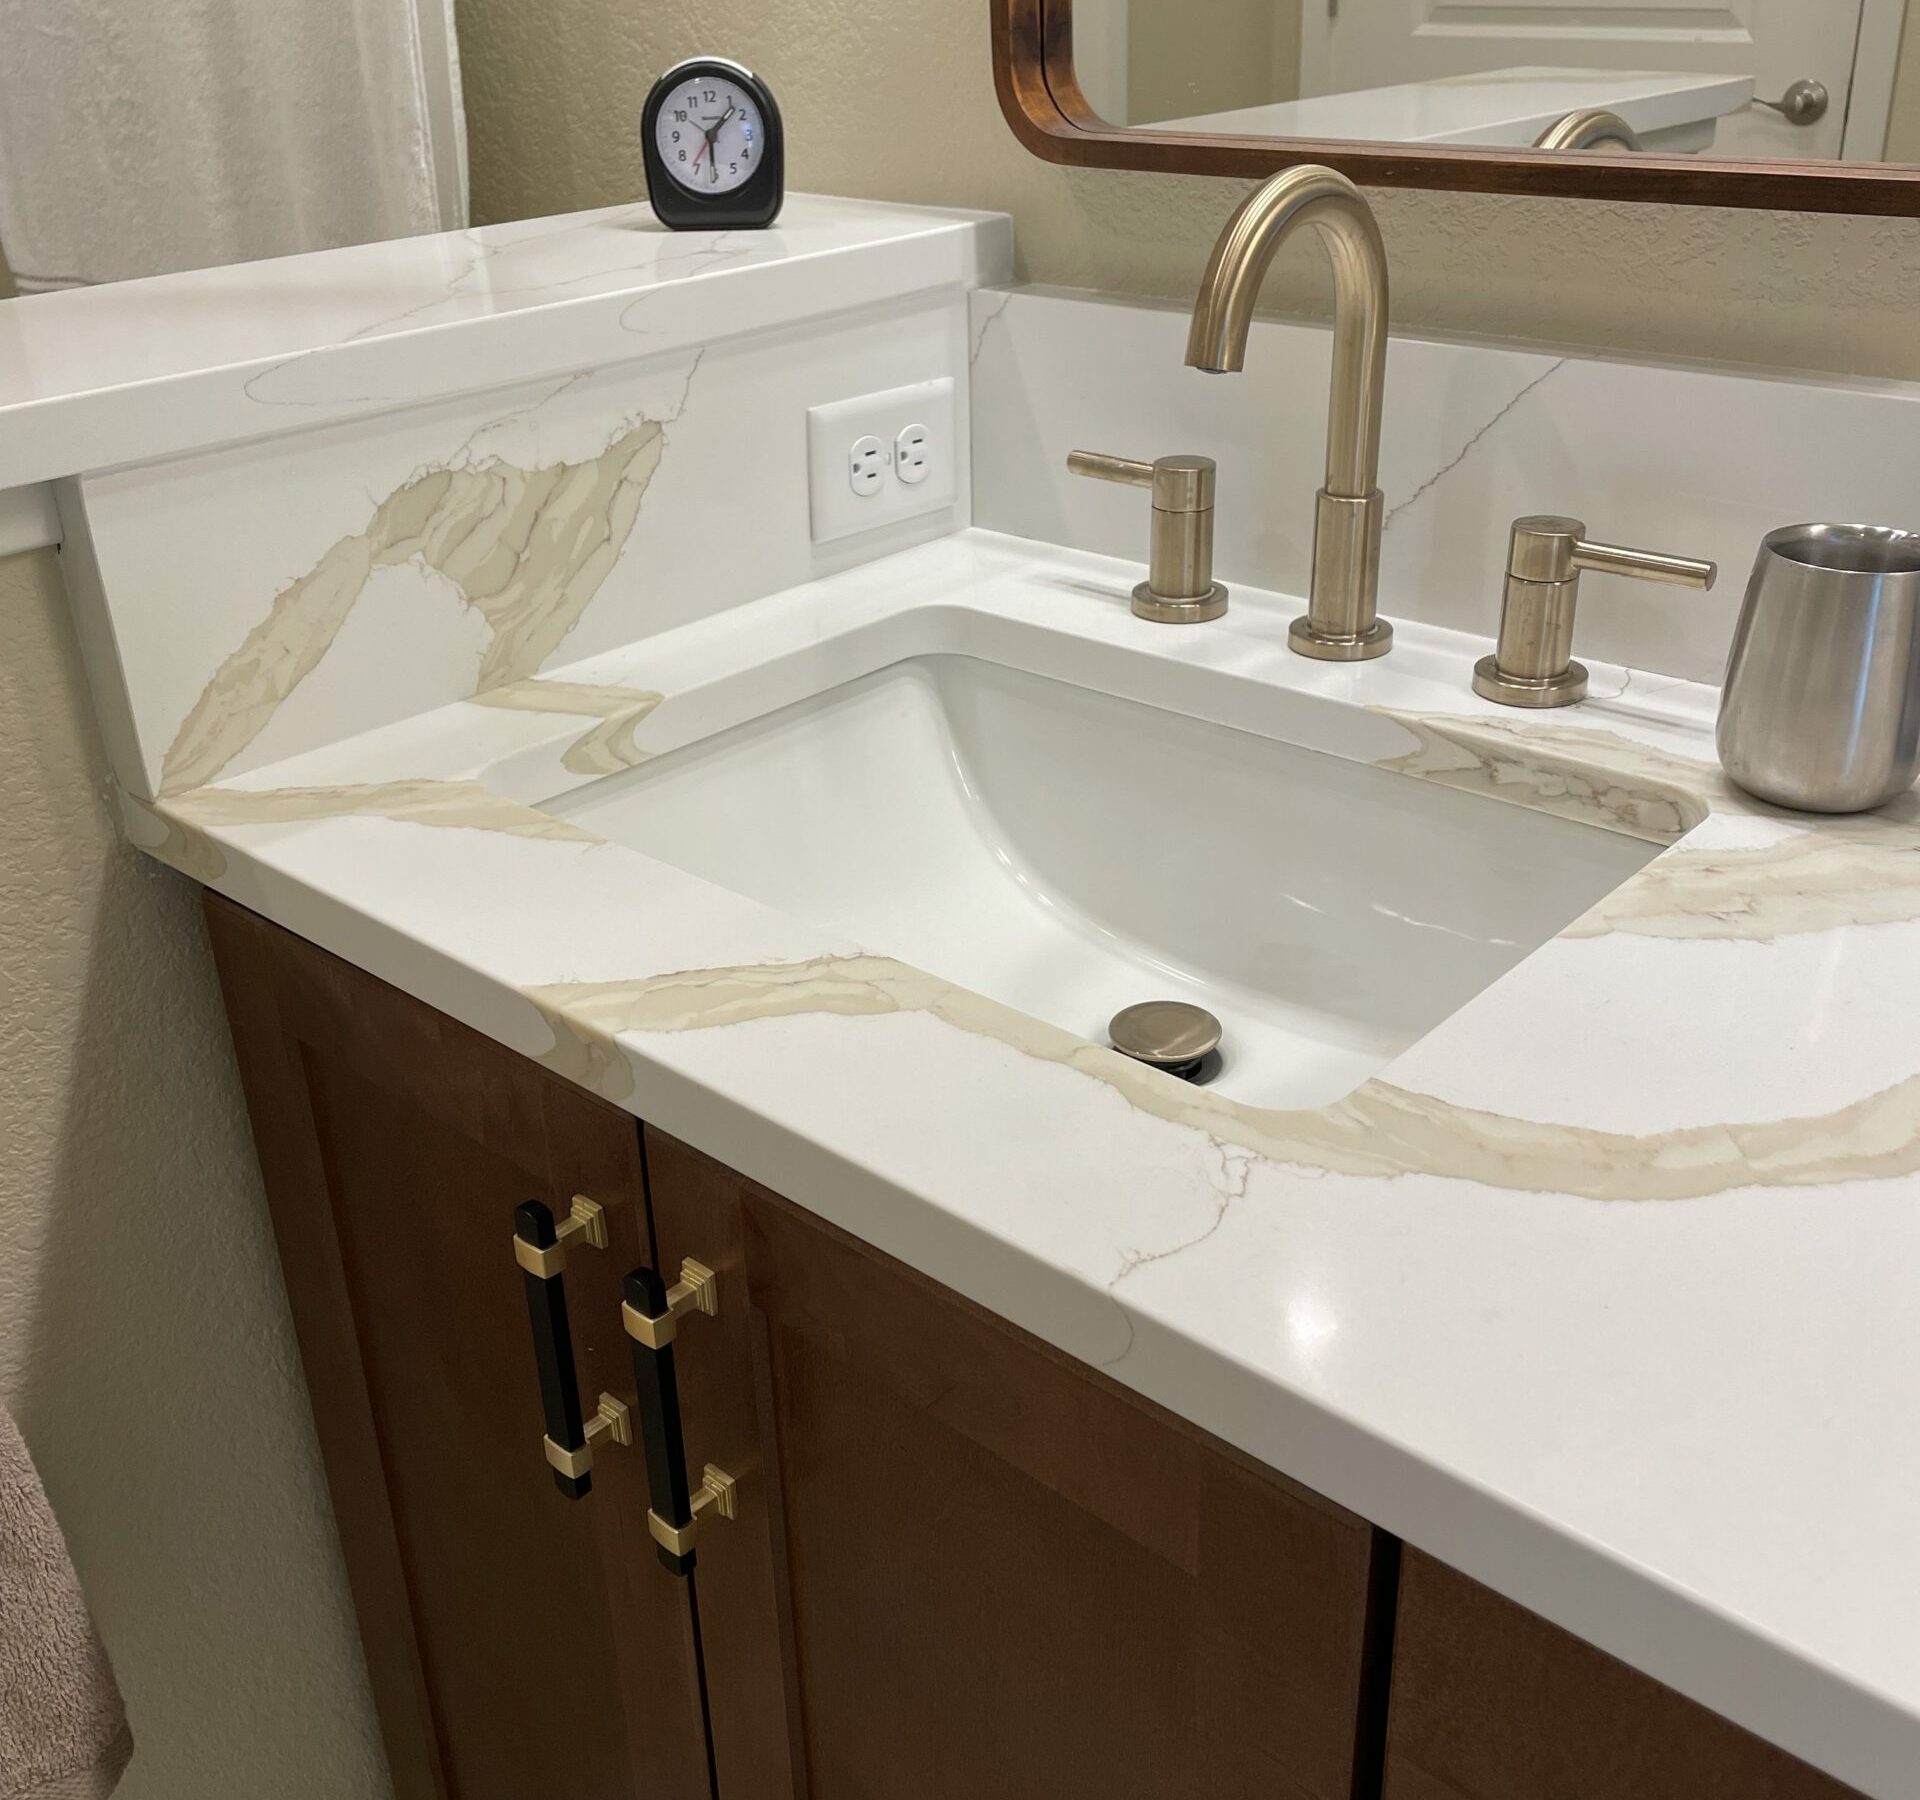 New wooden sink cabinetry and sink design